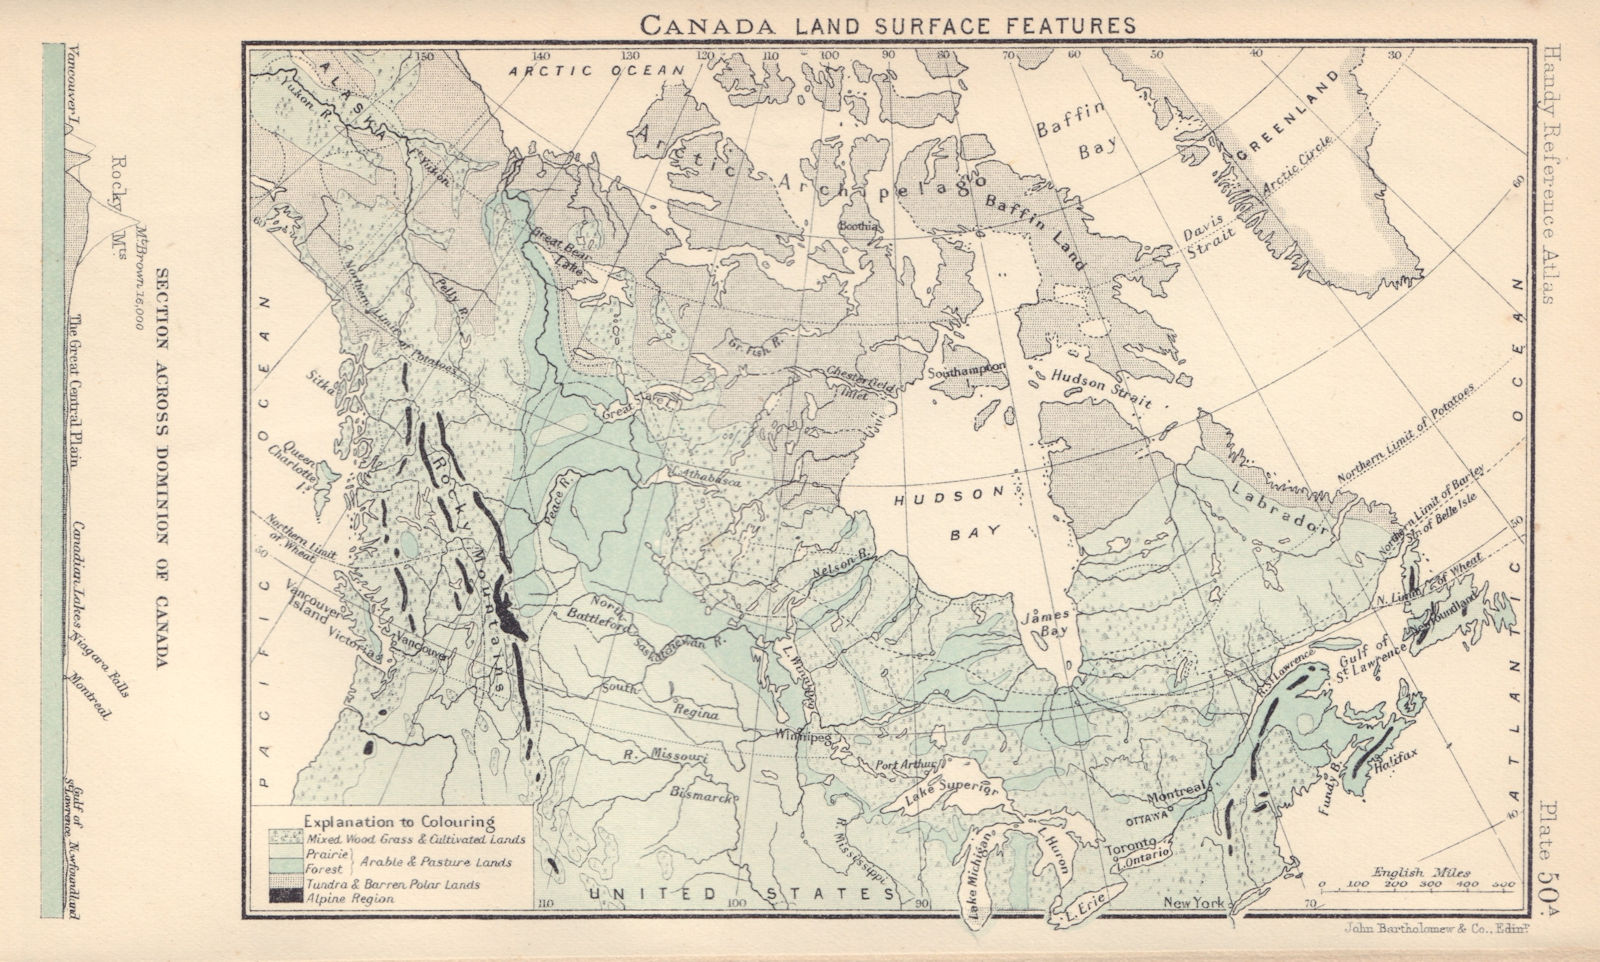 Associate Product Canada - Land Surface Features. Section across Canada. BARTHOLOMEW 1898 map